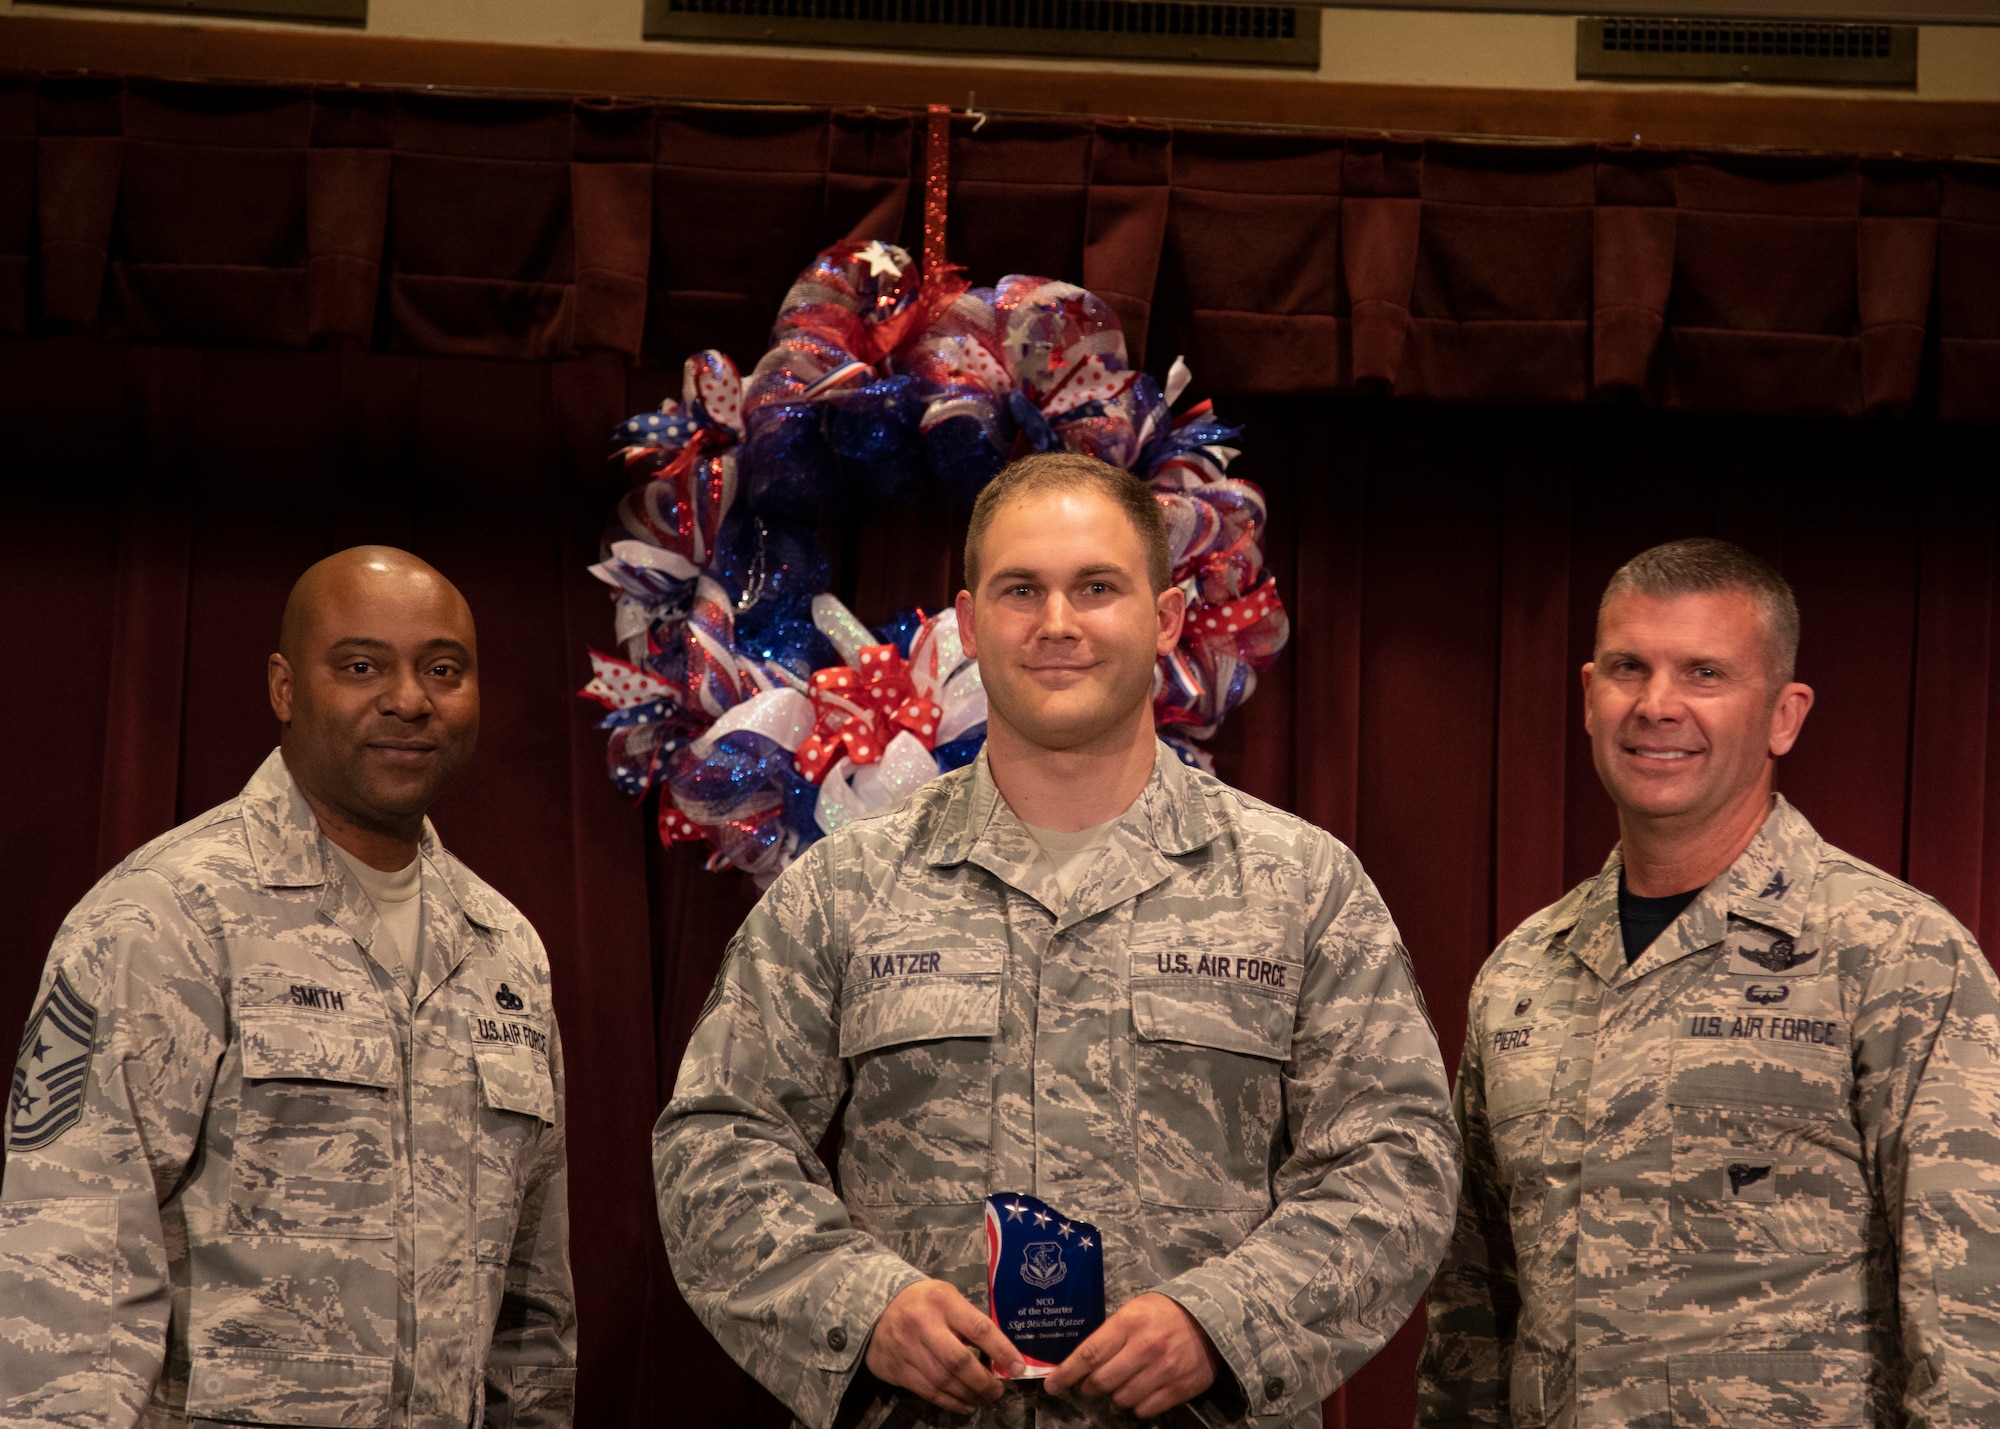 Tech. Sgt. Michael Katzer, 446th Aircraft Maintenance Squadron, wins the award for Noncommissioned Officer of the Quarter.